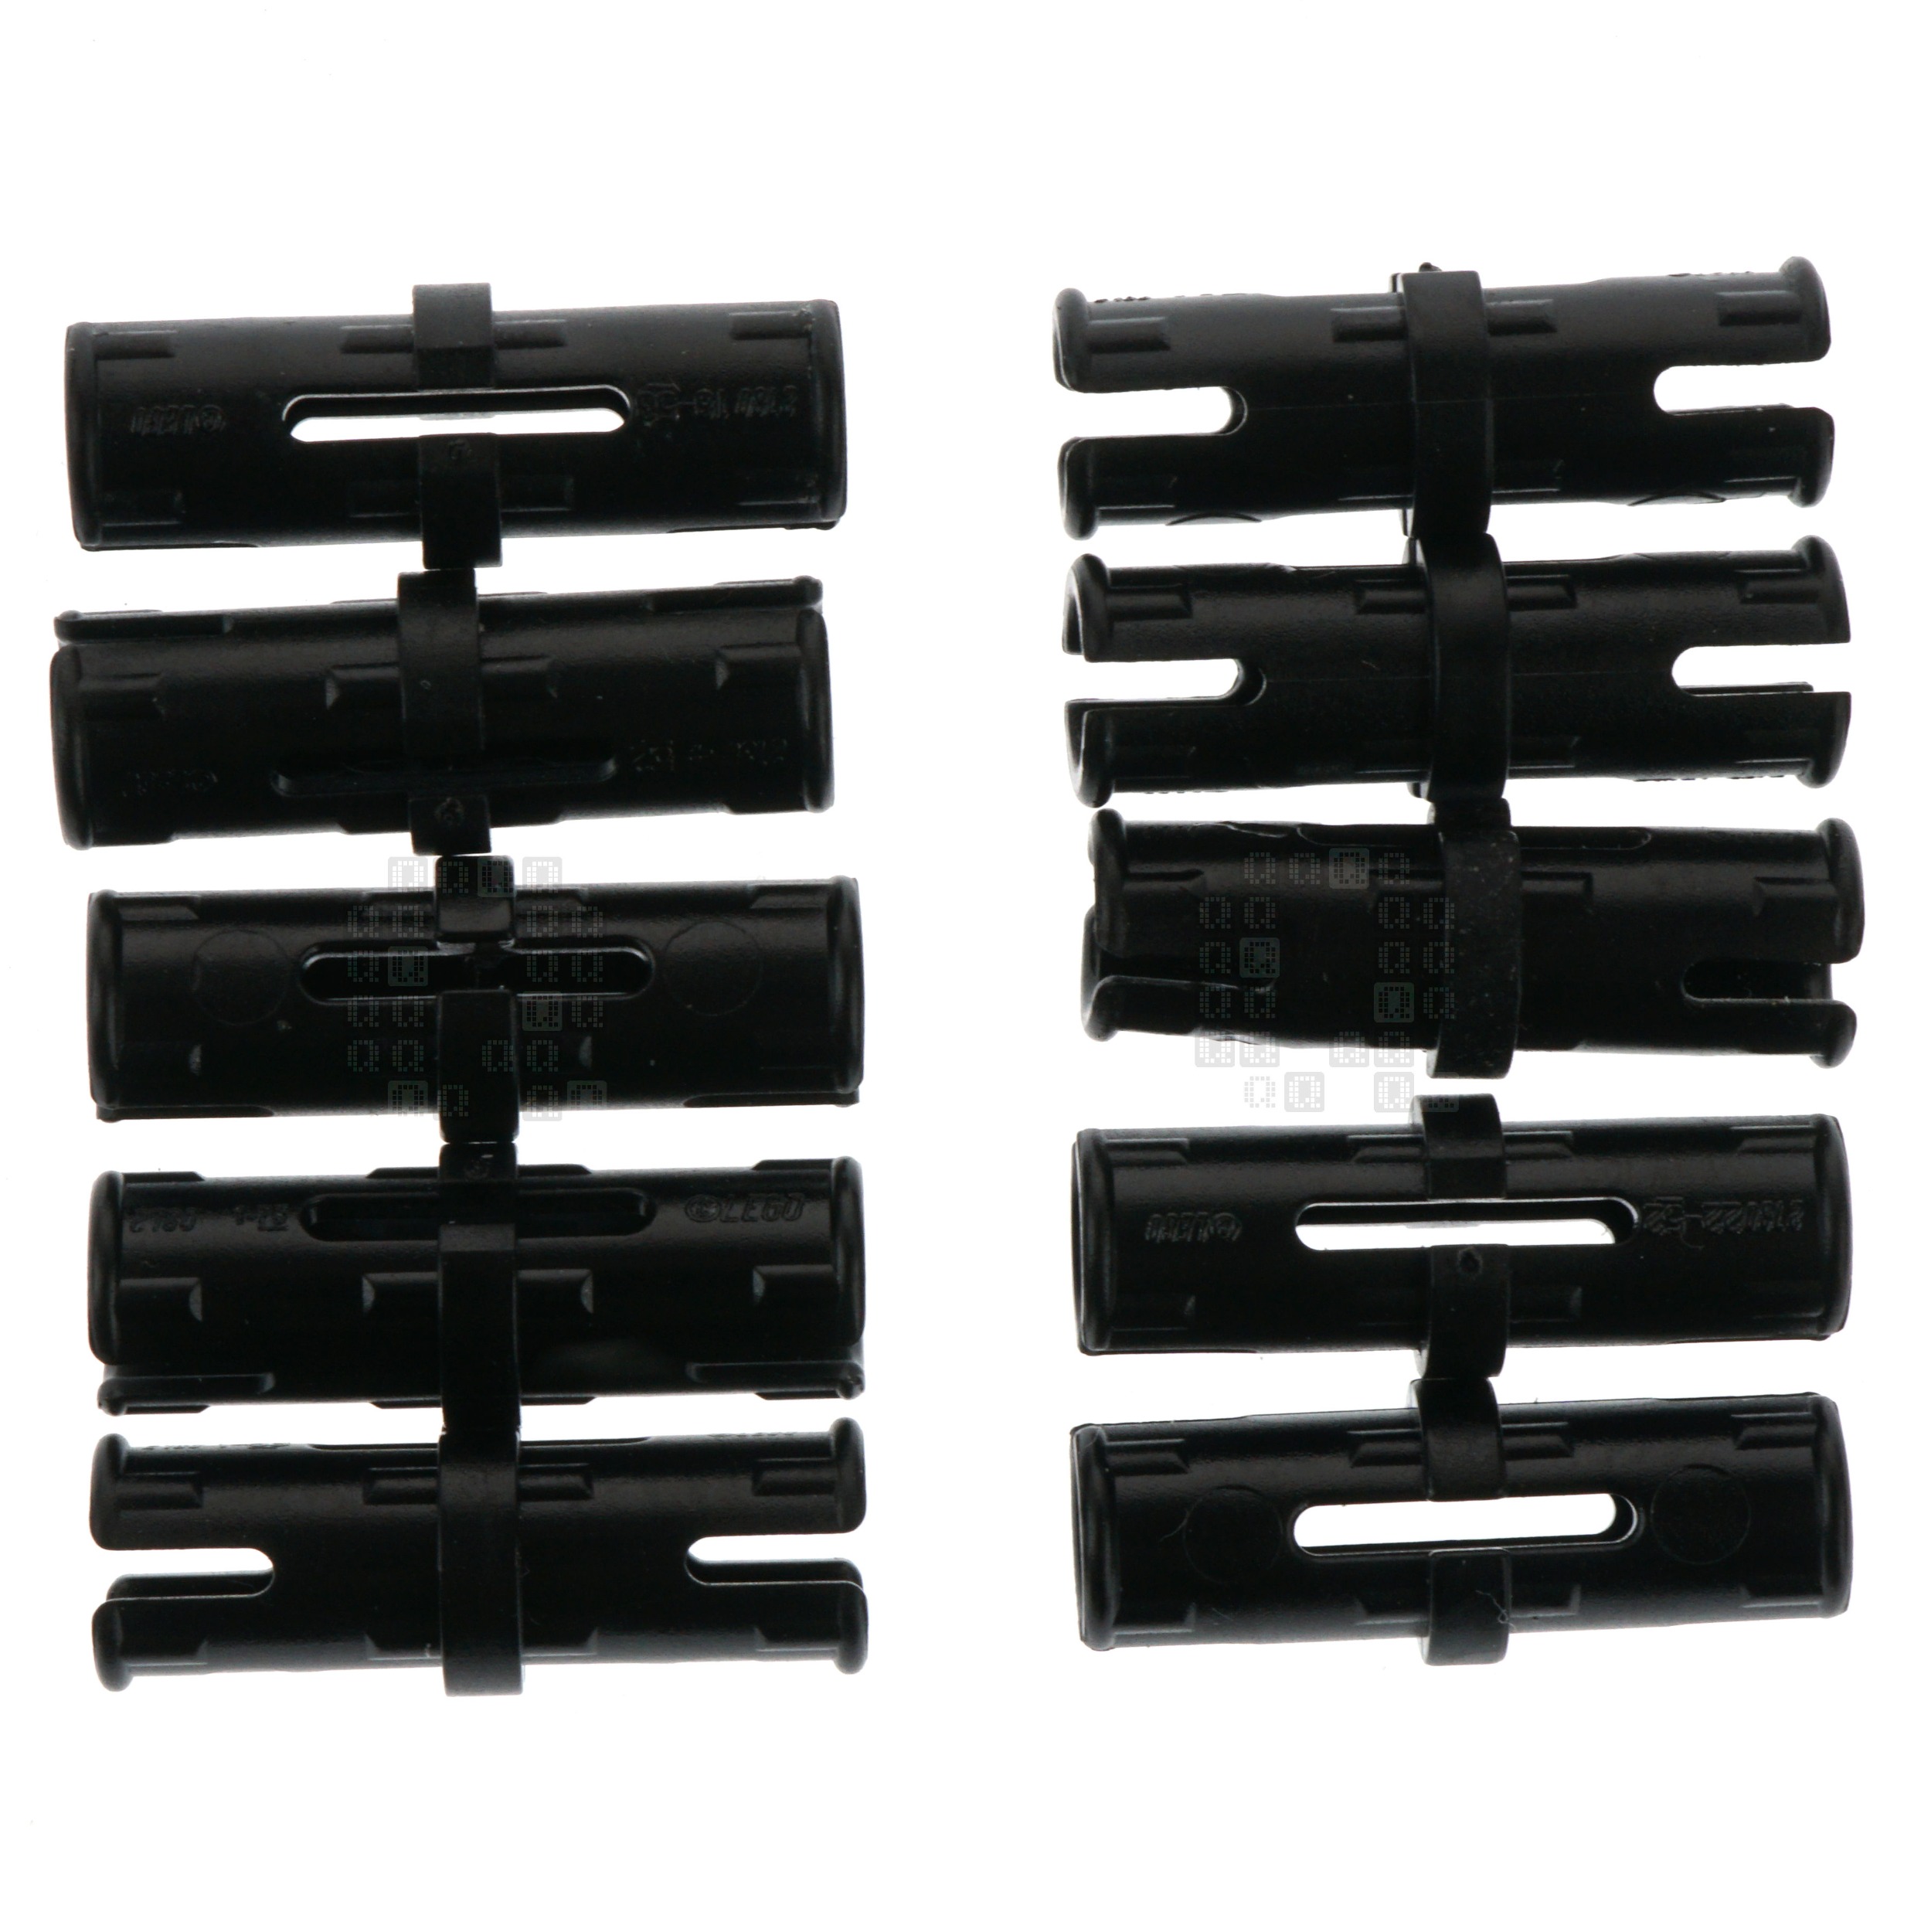 Lego 6279875 Technic Connector Peg with Friction, Black, 10-Pack